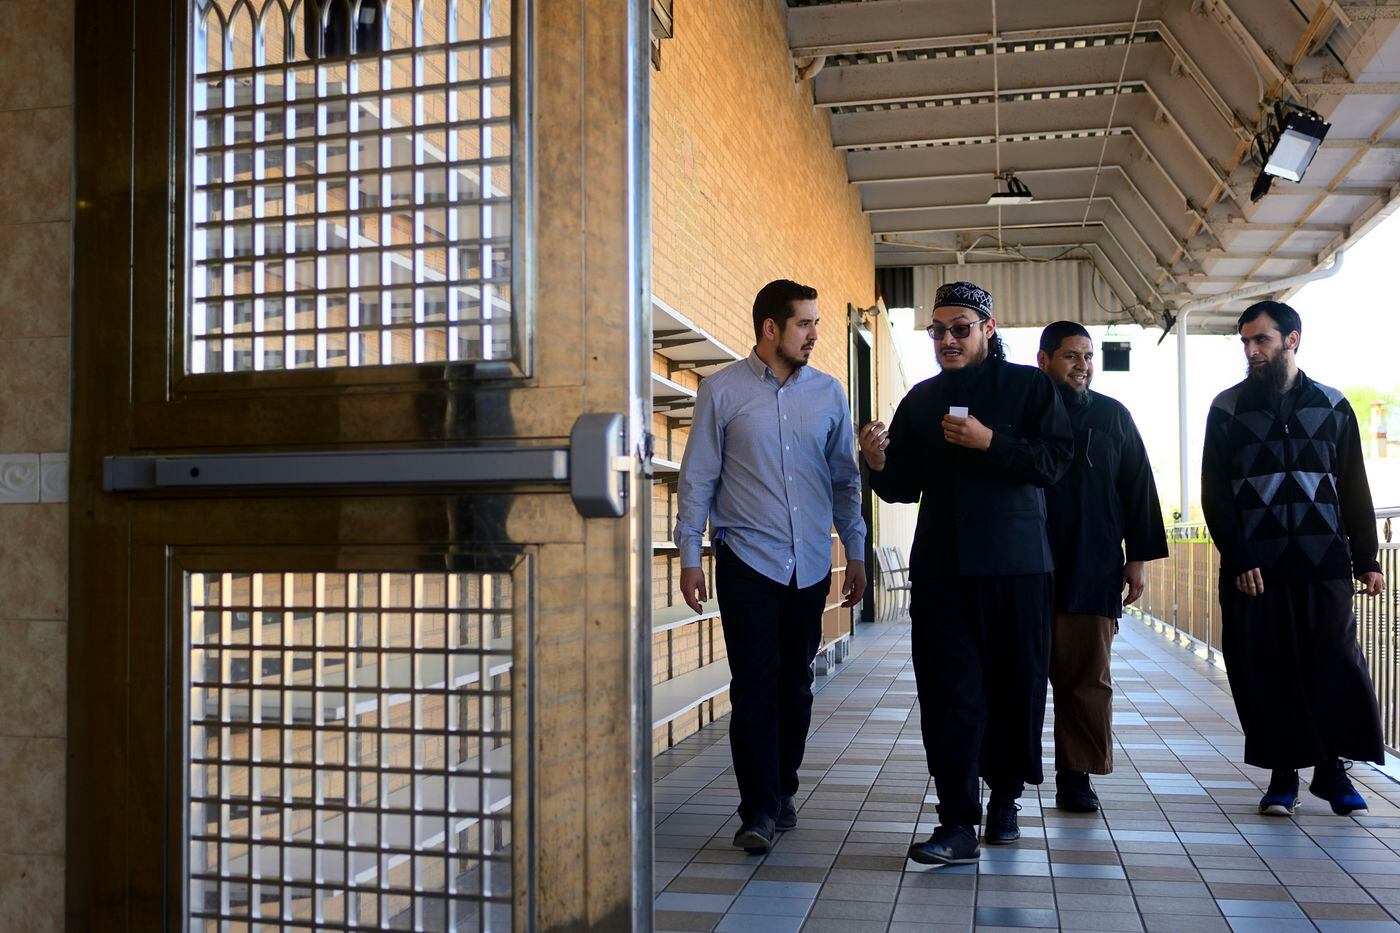 From left to right: Jalil Navarro, Ahmad Jose, and Imam Isa Parada (the fourth man is unidentified) are heading in for the afternoon prayer at Masjid al-Hidaya mosque, in North Philadelphia.